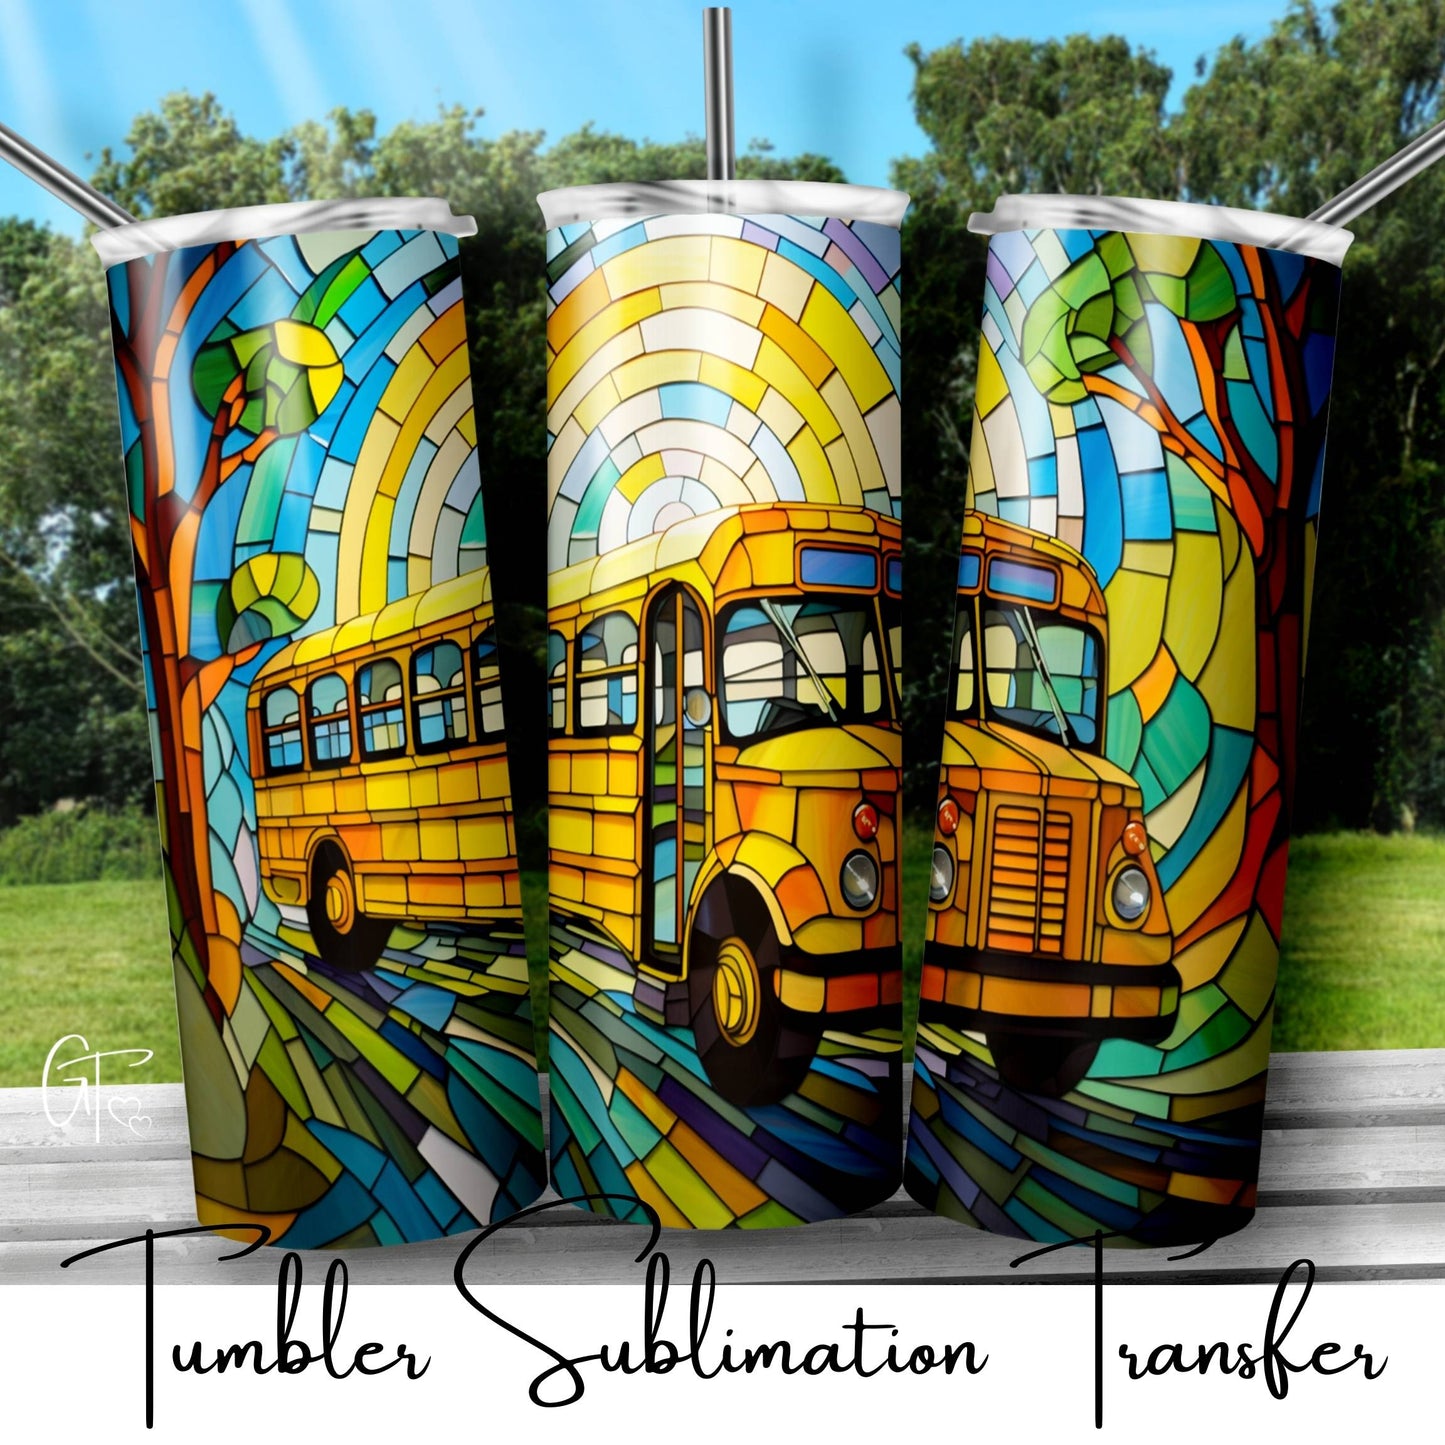 SUB1954 Stained Glass School Bus Driver 18 Tumbler Sublimation Transfer